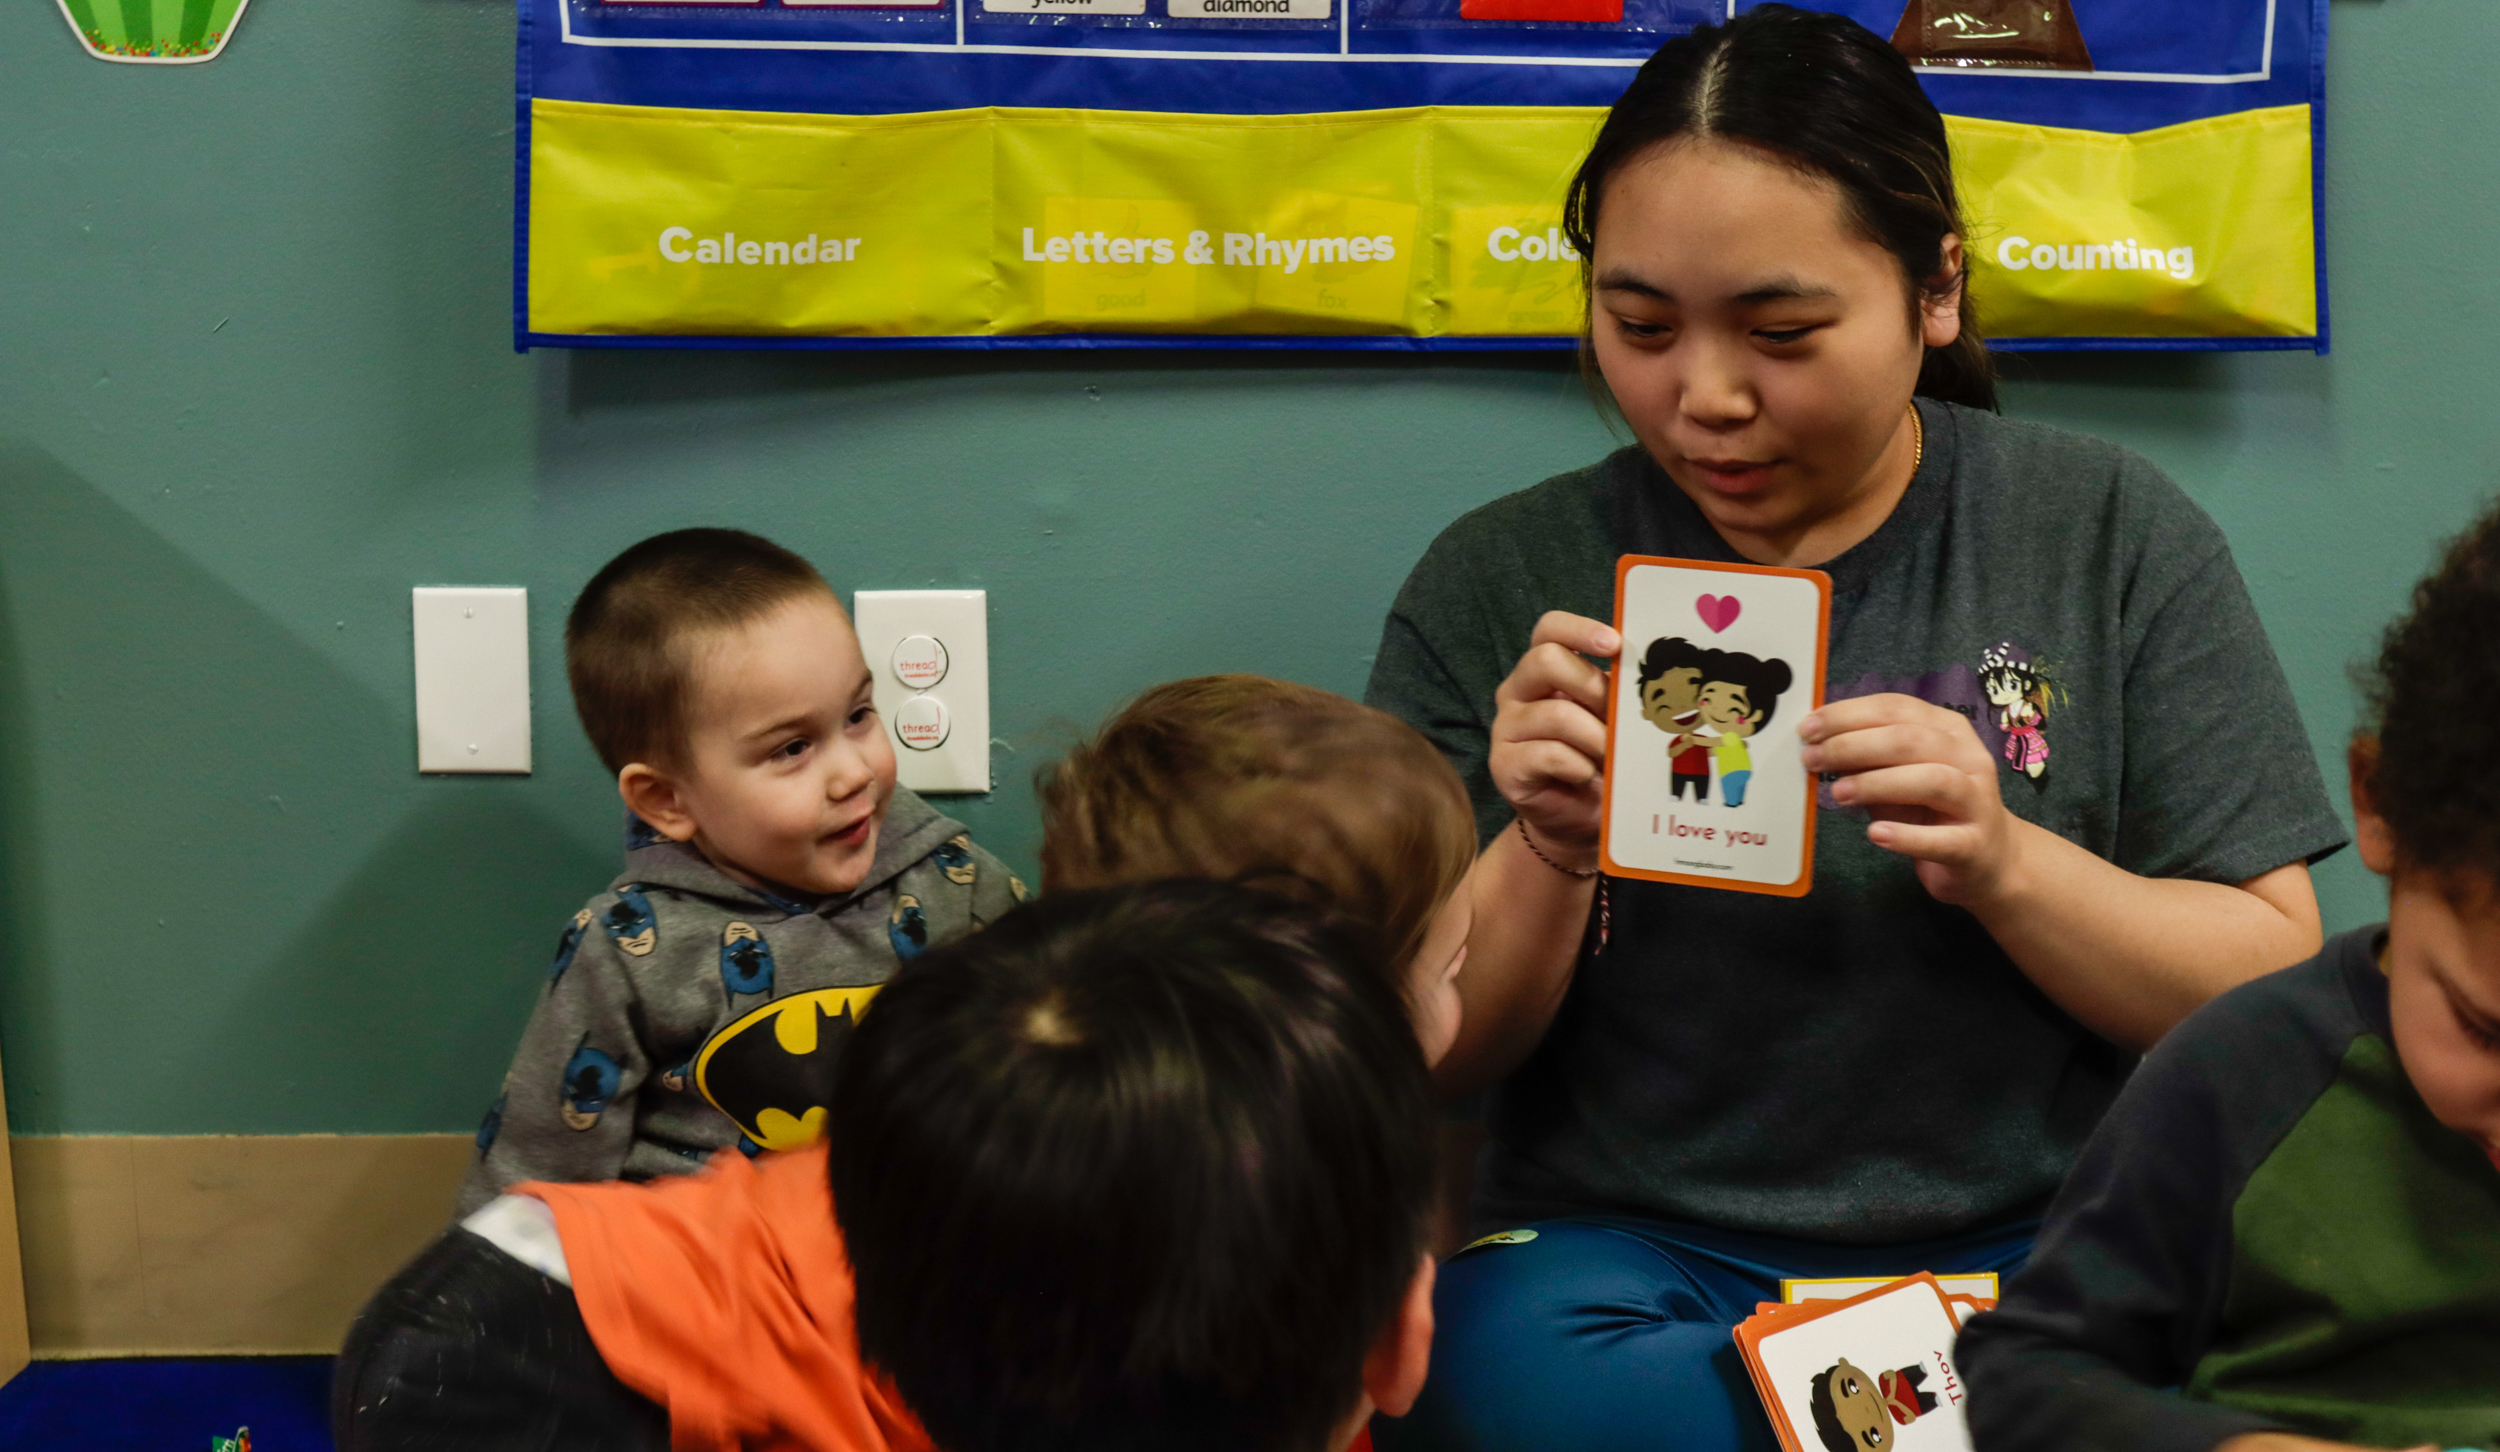 A woman shows a flash card of two figures hugging to a room of toddlers.